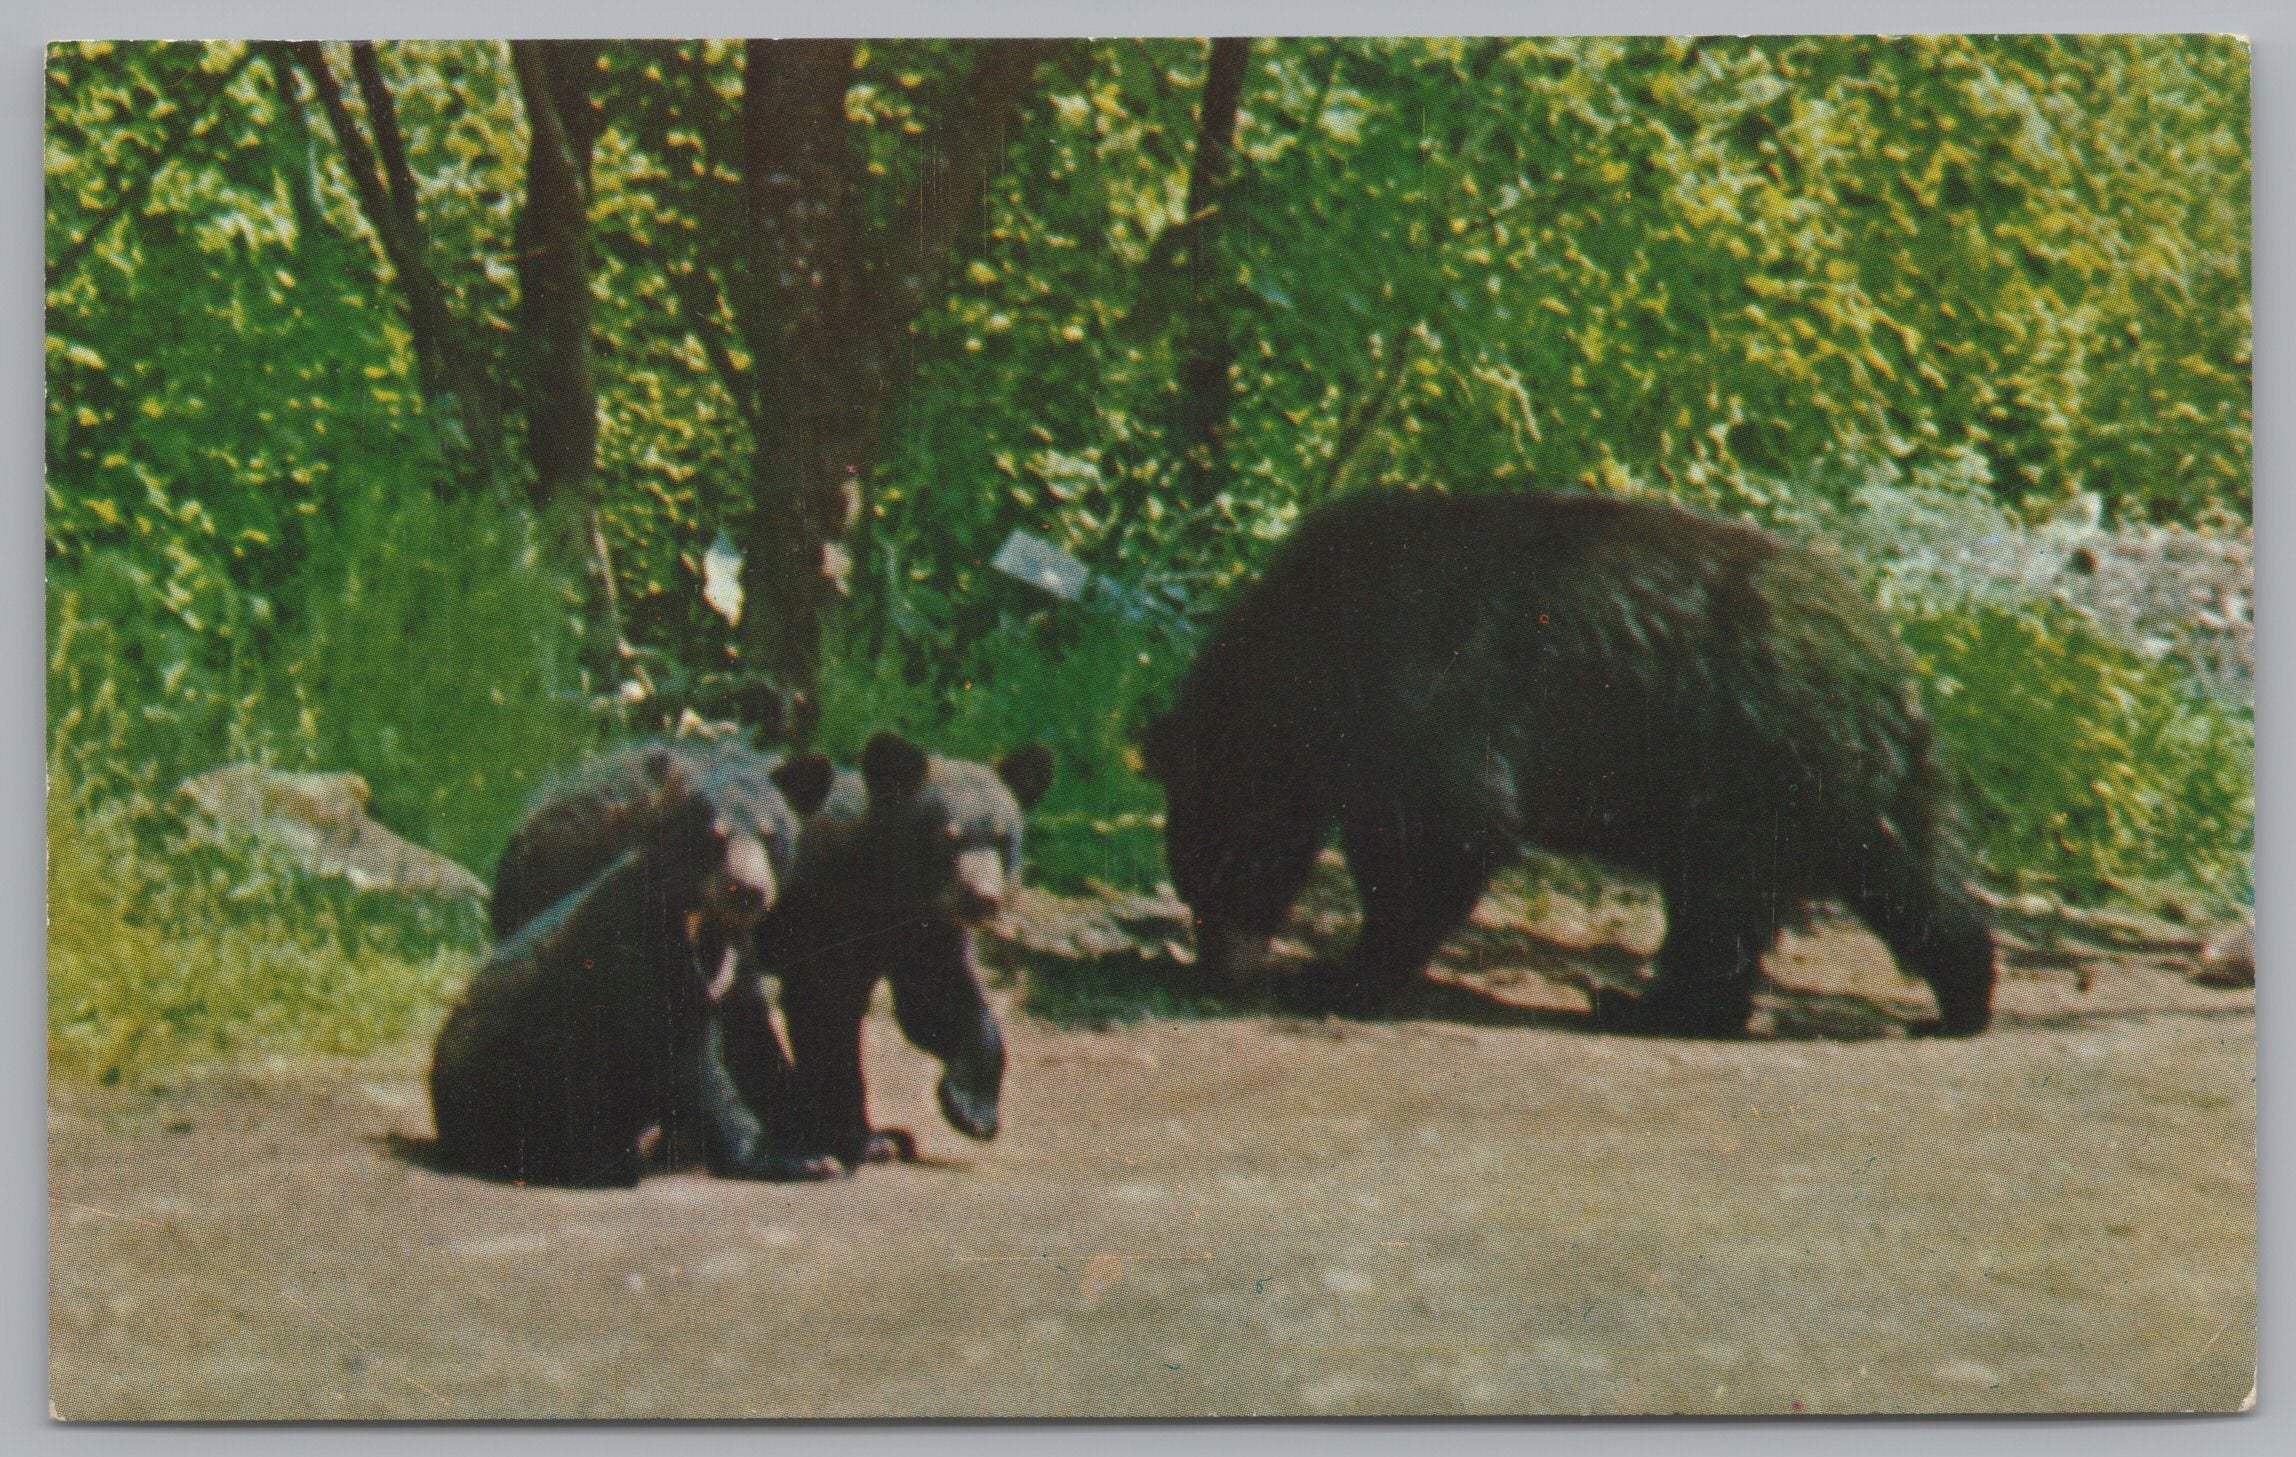 A Mother Bear And Her Cubs, Baxter State Park, Maine, USA, Vintage Post Card.